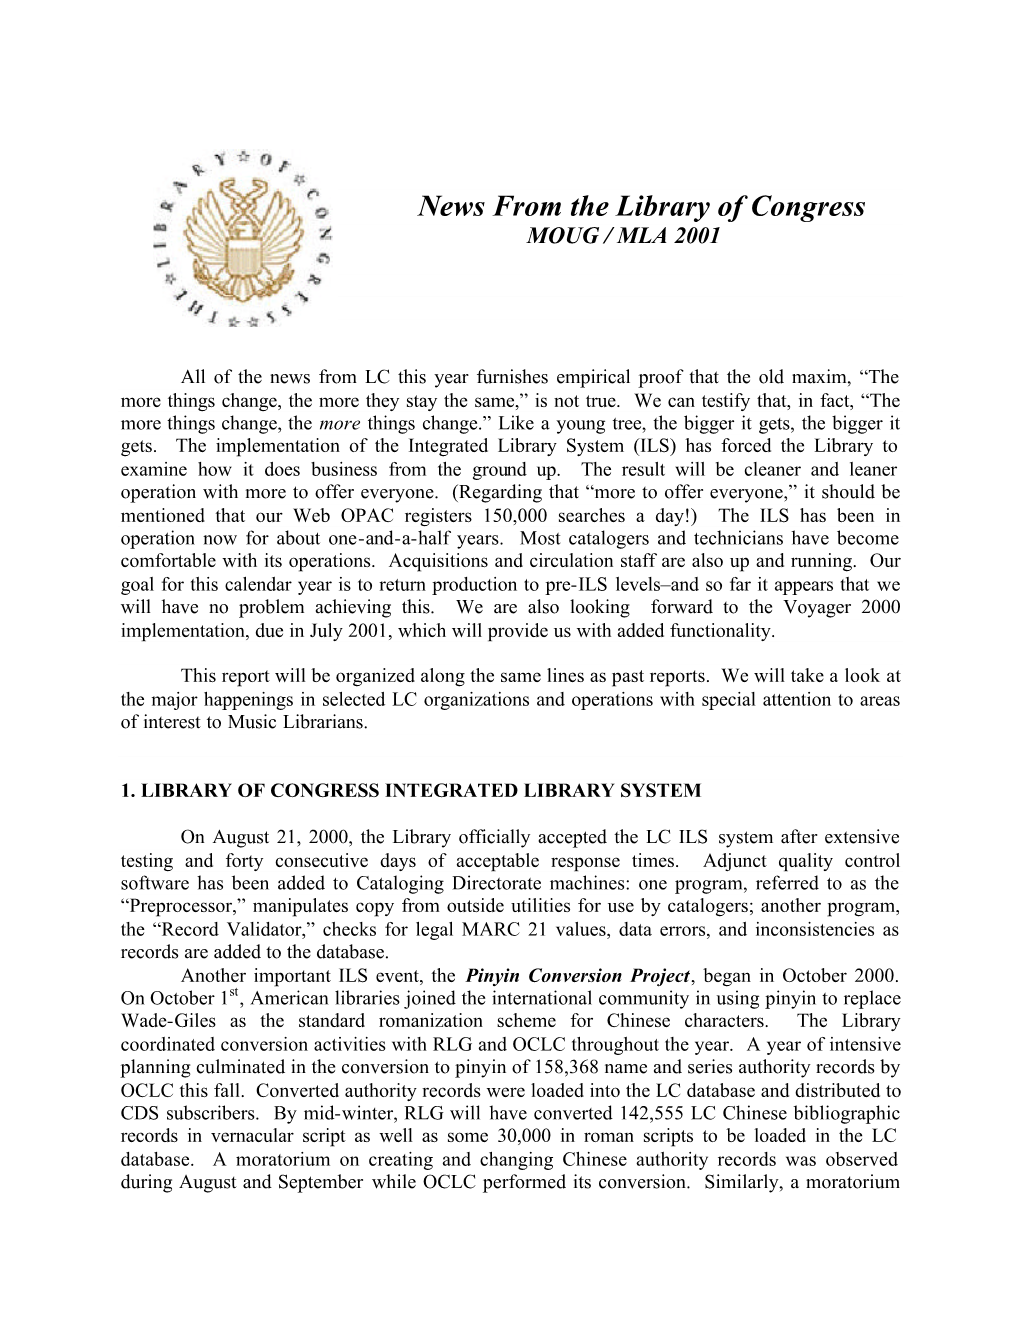 News from the Library of Congress MOUG / MLA 2001